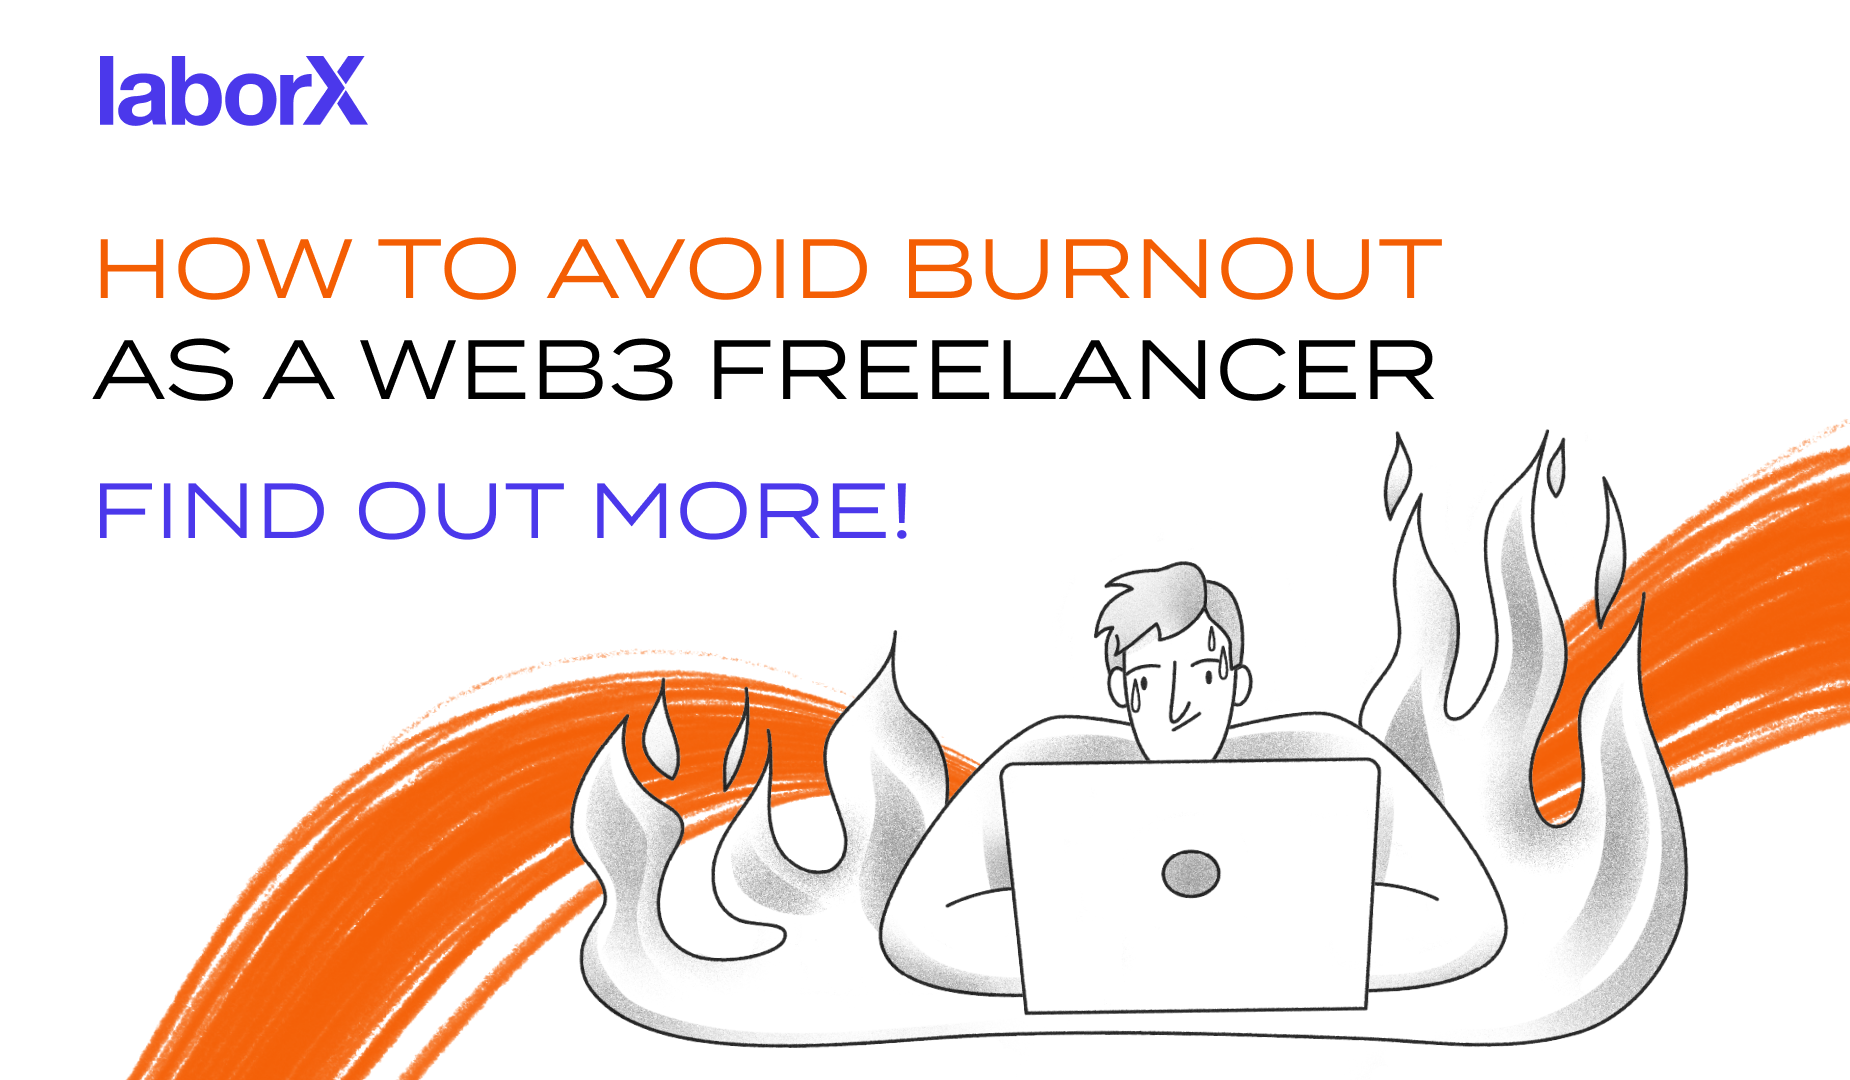 How To Avoid Burnout As A Web3 Freelancer